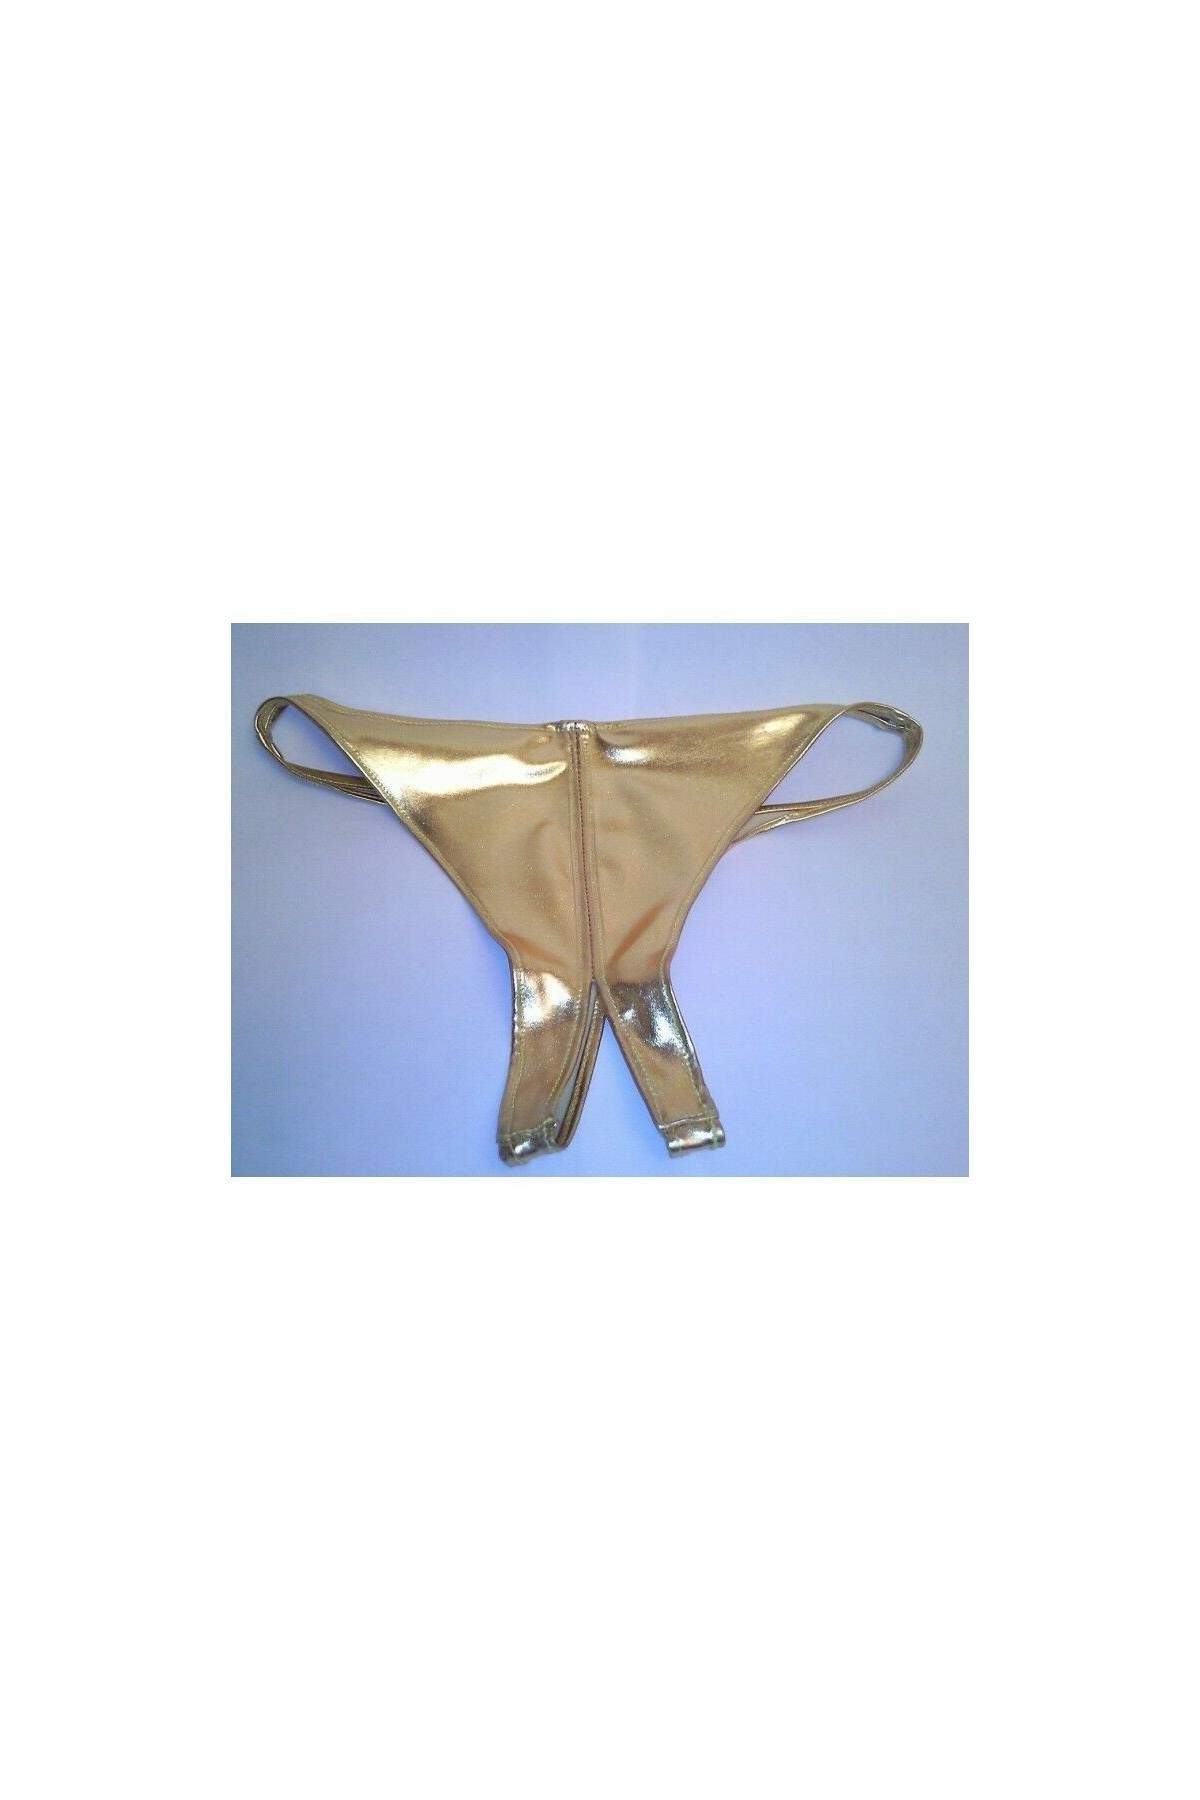 Leather look TANGA gold Ouvert sizes 34 - 52 - Deutsche Produktion